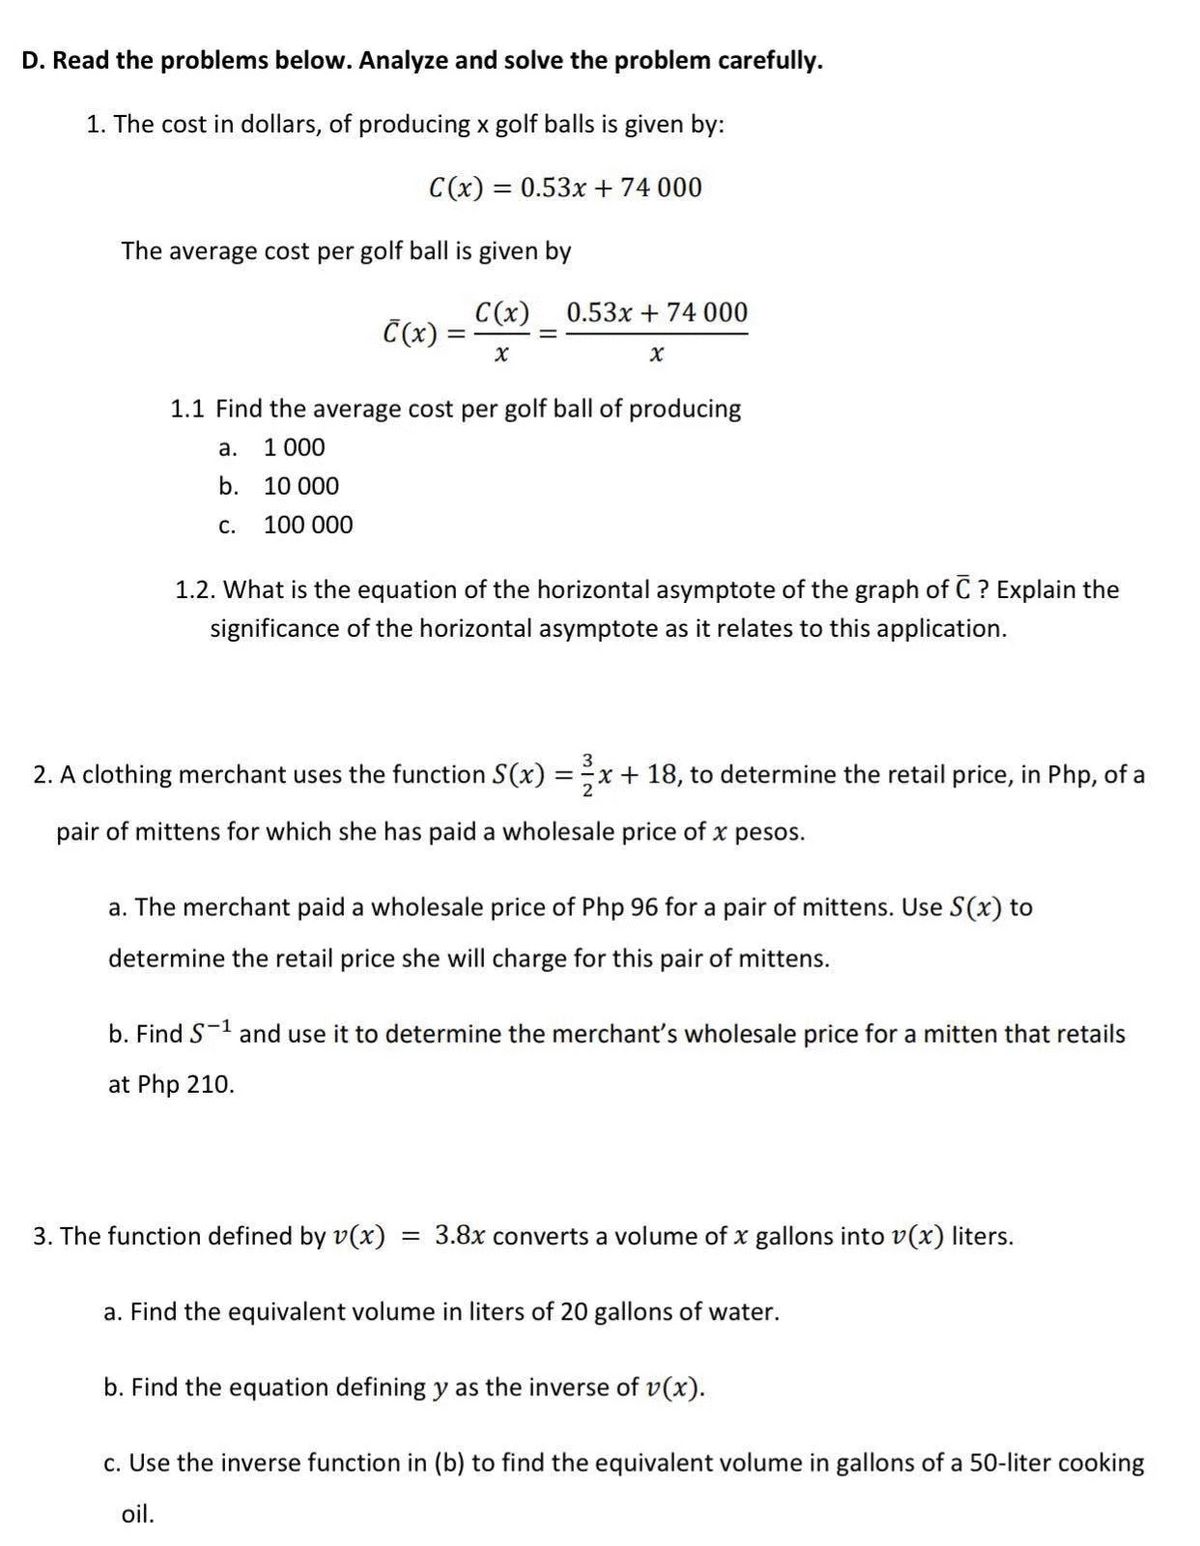 D. Read the problems below. Analyze and solve the problem carefully.
1. The cost in dollars, of producing x golf balls is given by:
C(x) = 0.53x + 74 000
The average cost per golf ball is given by
C(x)
Č(x) =
0.53x + 74 000
1.1 Find the average cost per golf ball of producing
а.
1 000
b. 10 000
с.
100 000
1.2. What is the equation of the horizontal asymptote of the graph of C ? Explain the
significance of the horizontal asymptote as it relates to this application.
3
2. A clothing merchant uses the function S(x) =x+ 18, to determine the retail price, in Php, of a
pair of mittens for which she has paid a wholesale price of x pesos.
a. The merchant paid a wholesale price of Php 96 for a pair of mittens. Use S(x) to
determine the retail price she will charge for this pair of mittens.
b. Find S-1 and use it to determine the merchant's wholesale price for a mitten that retails
at Php 210.
3. The function defined by v(x)
= 3.8x converts a volume of x gallons into v(x) liters.
a. Find the equivalent volume in liters of 20 gallons of water.
b. Find the equation defining y as the inverse of v(x).
c. Use the inverse function in (b) to find the equivalent volume in gallons of a 50-liter cooking
oil.
